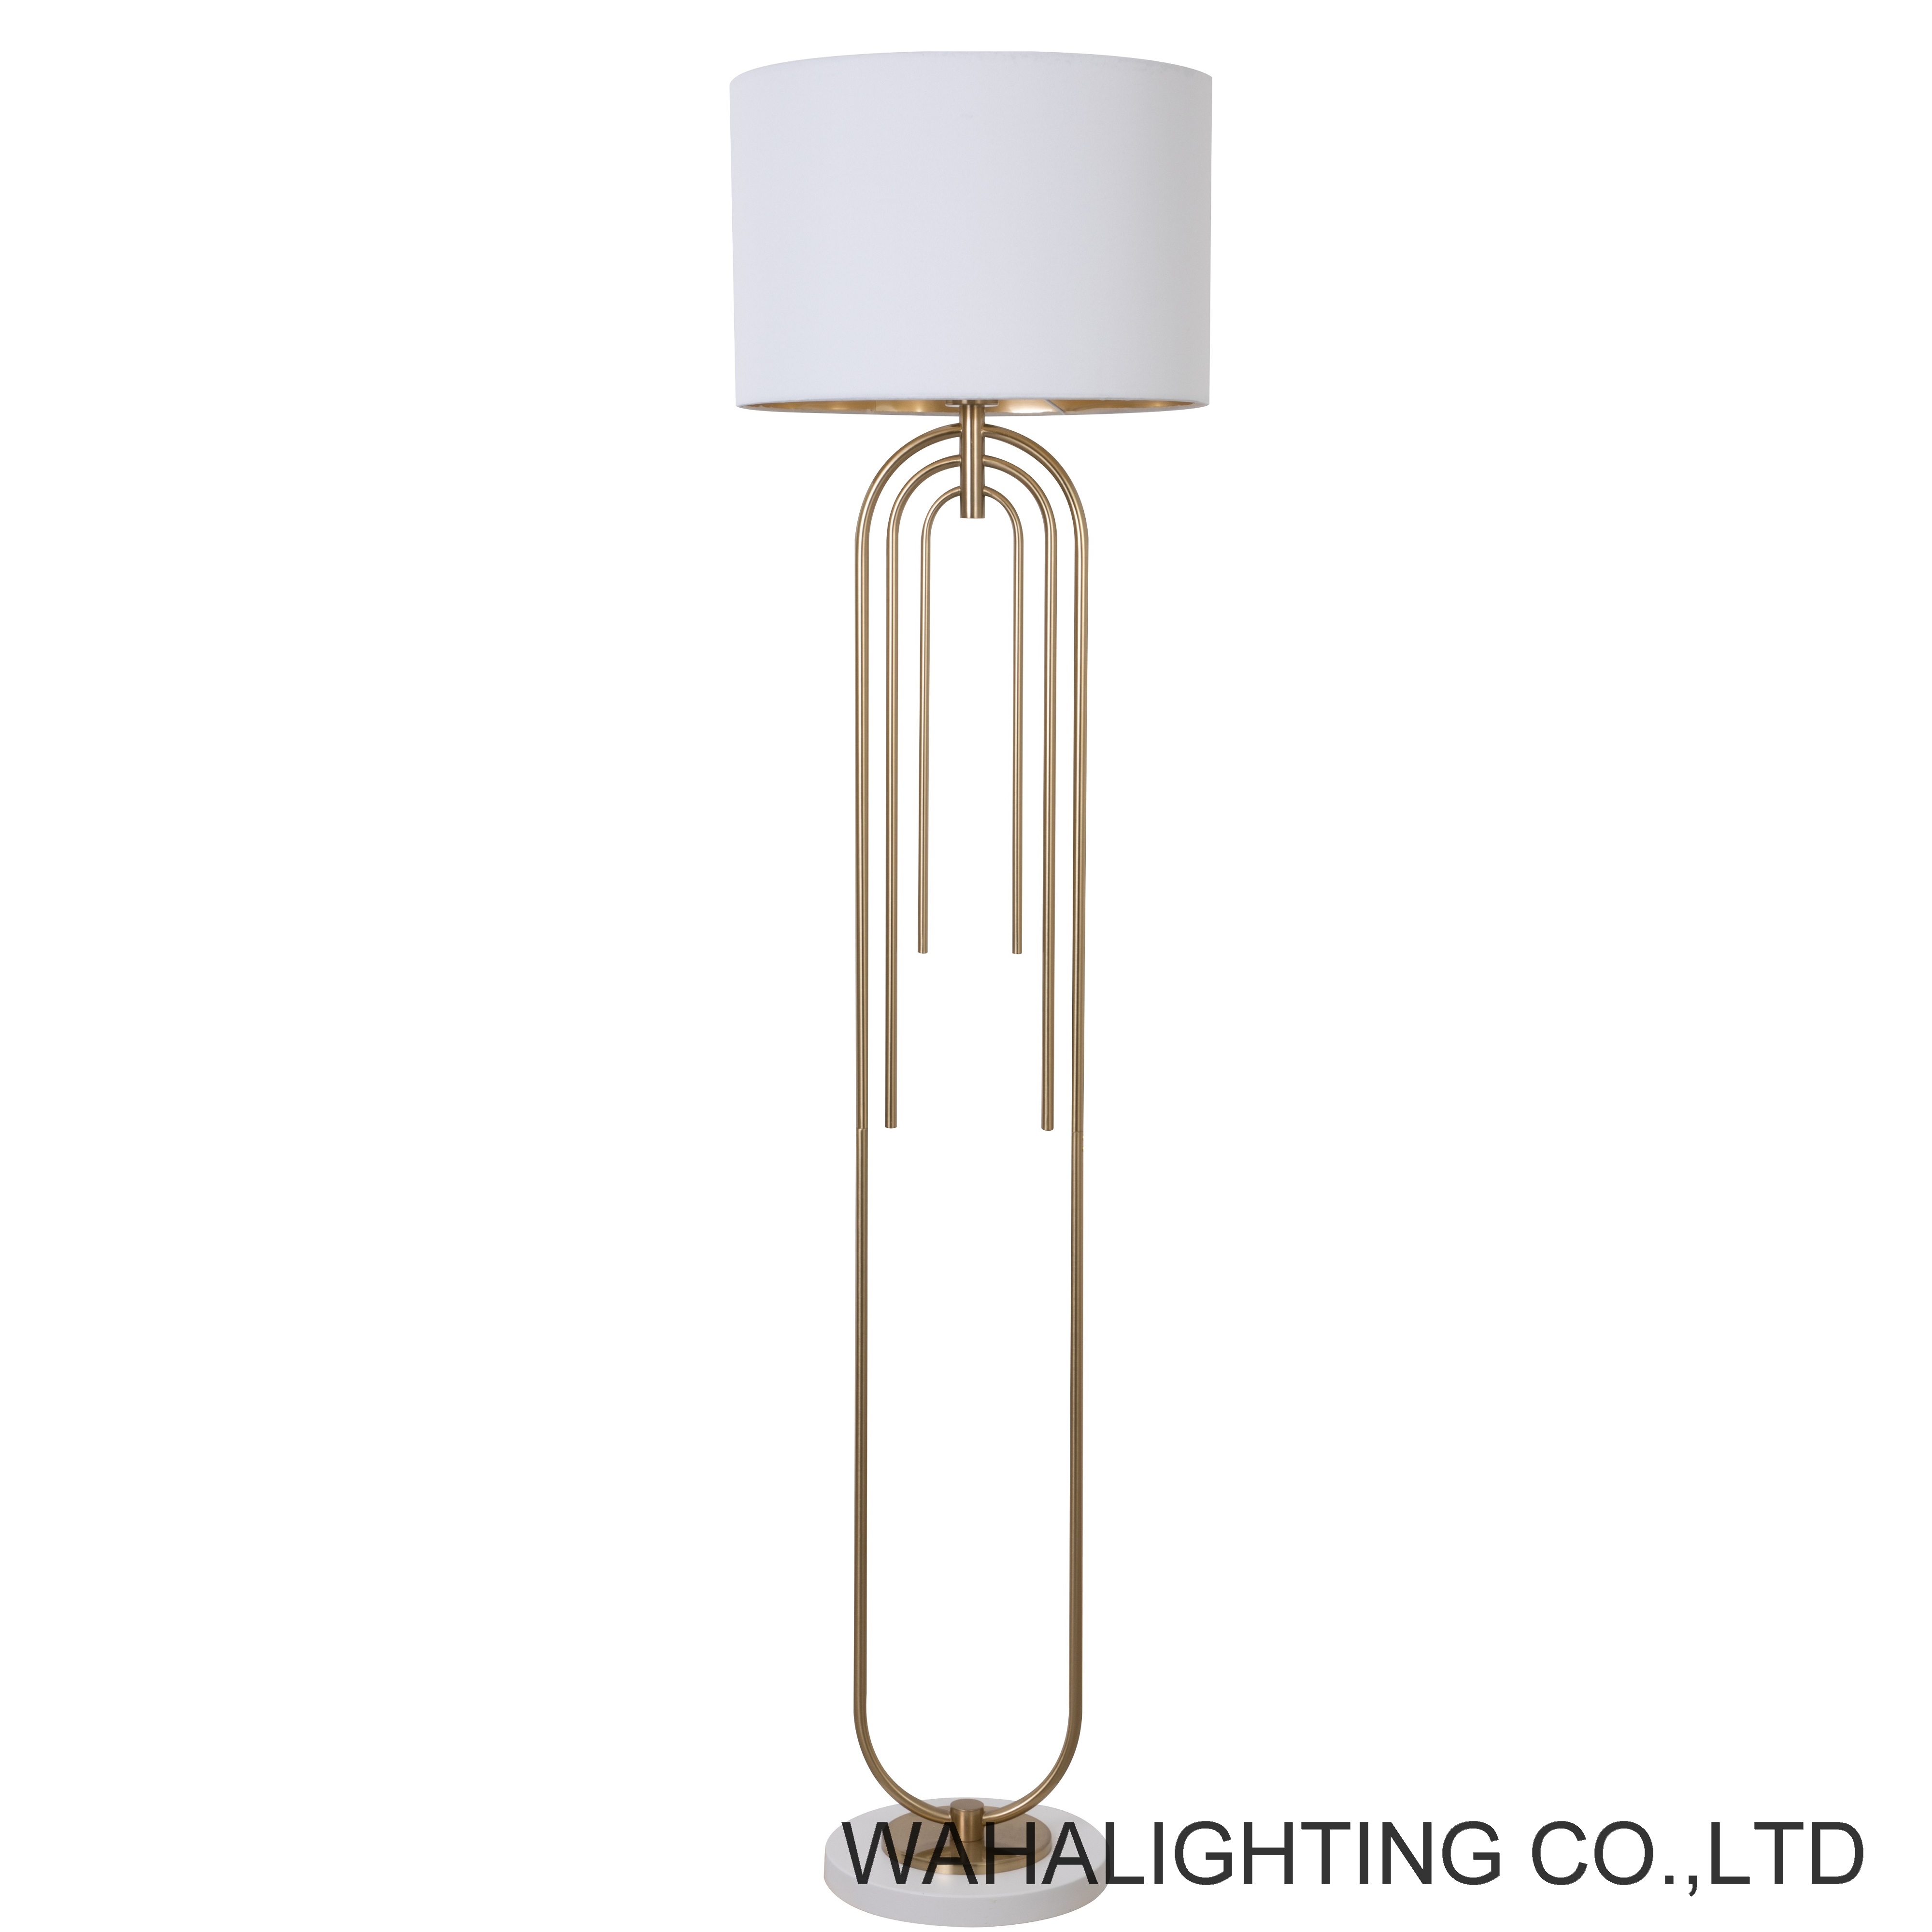 Simple and luxurious floor lamp